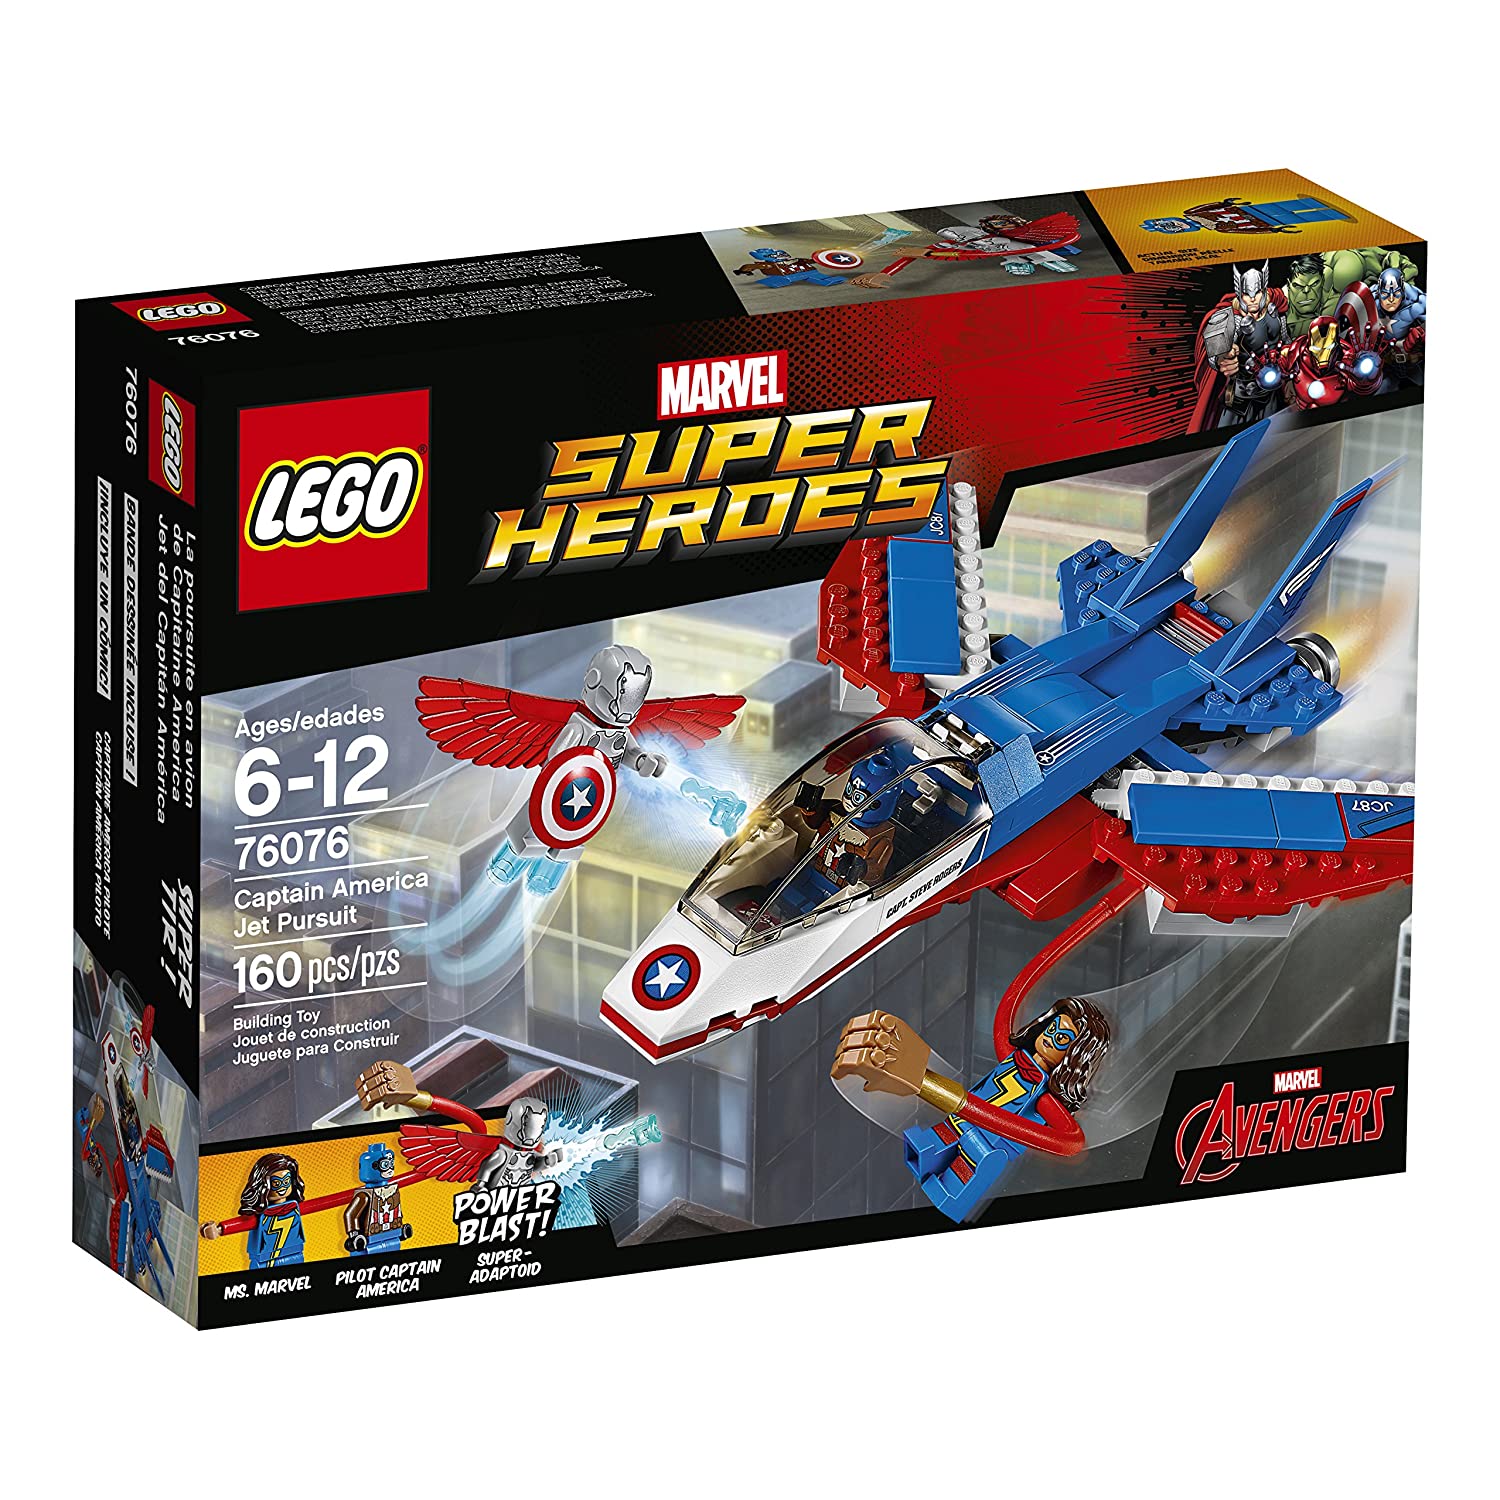 Top 9 Best LEGO Captain America Sets Reviews in 2022 3